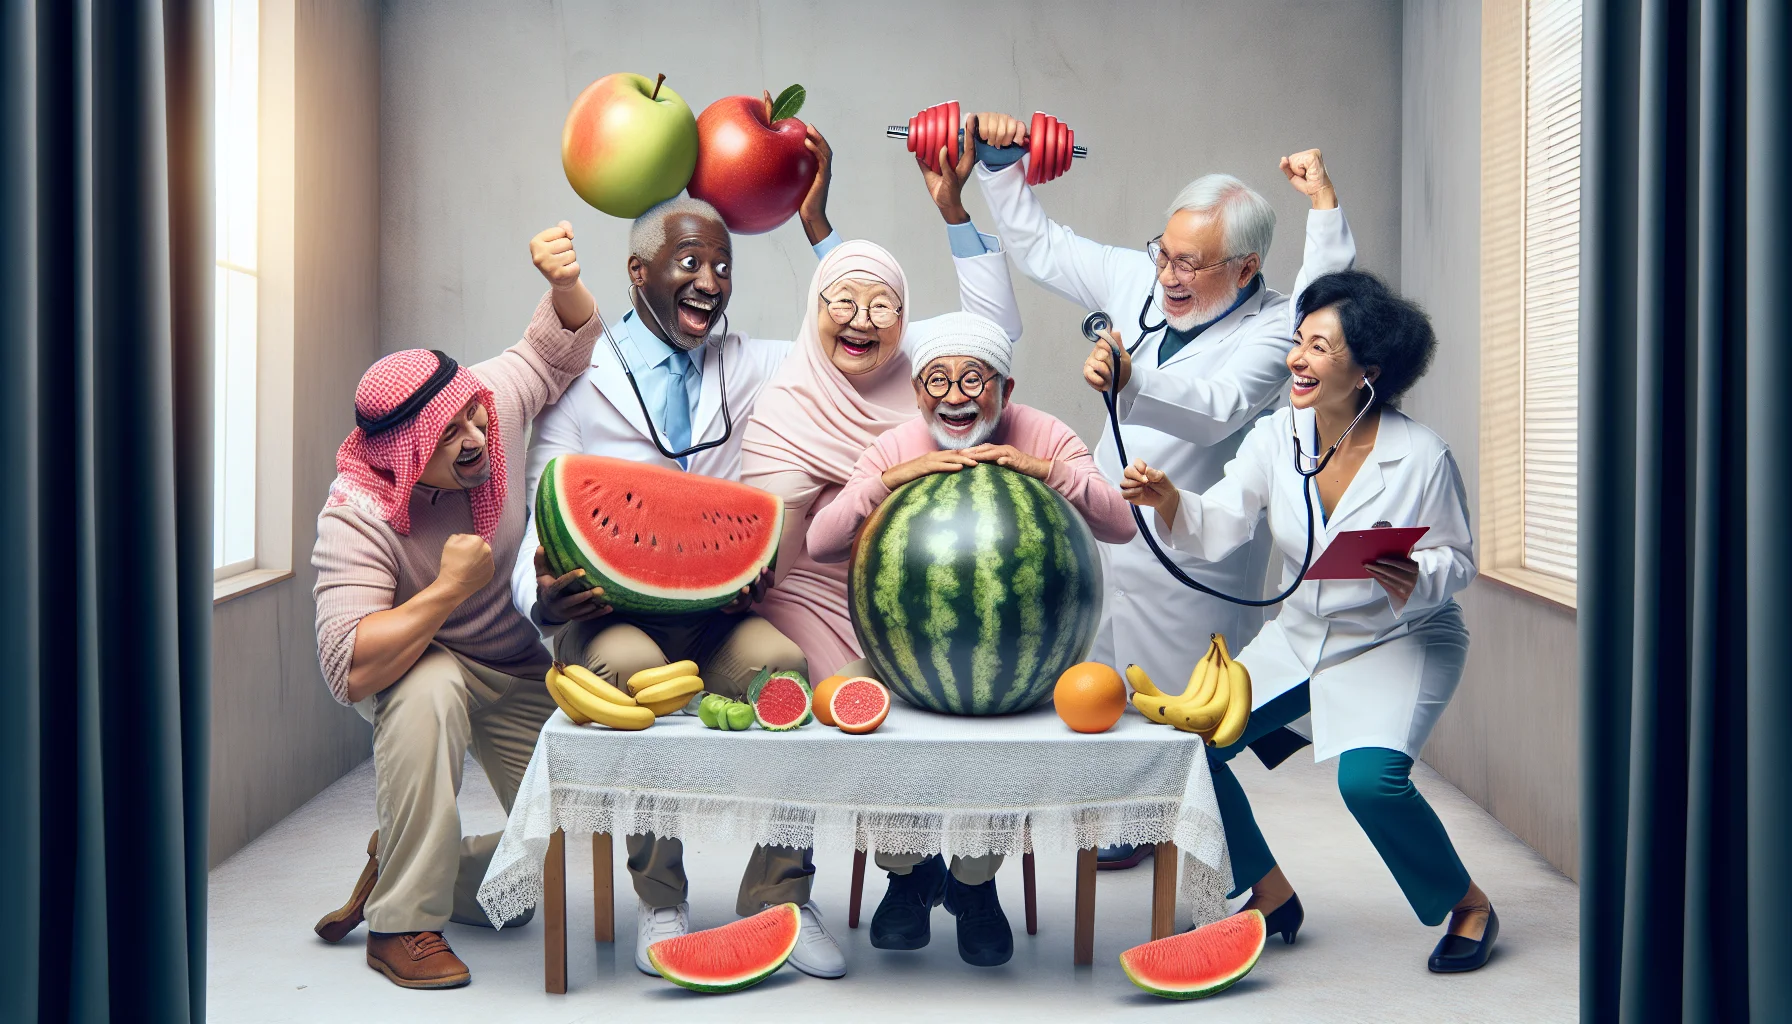 Portray a humorous scene in a realistic style where a group of elderly individuals of various descents -- a South Asian man, a Middle-Eastern woman, a Hispanic man and a Black woman -- are participating in a 'fruit energy challenge'. They are all seated around a table filled with different types of fruit. The South Asian man is cheerfully attempting to lift a barbell made out of two giant apples, as a symbol for energy. On the other hand, the Middle-Eastern woman is trying to balance a bunch of bananas on her head, illustrating the balance a good diet can bring. The Hispanic man, showcasing the health aspect, is doctor-like, playfully auscultating a large watermelon with a stethoscope. Lastly, the Black woman is energetically dancing around with a pair of grapefruit pom-poms.